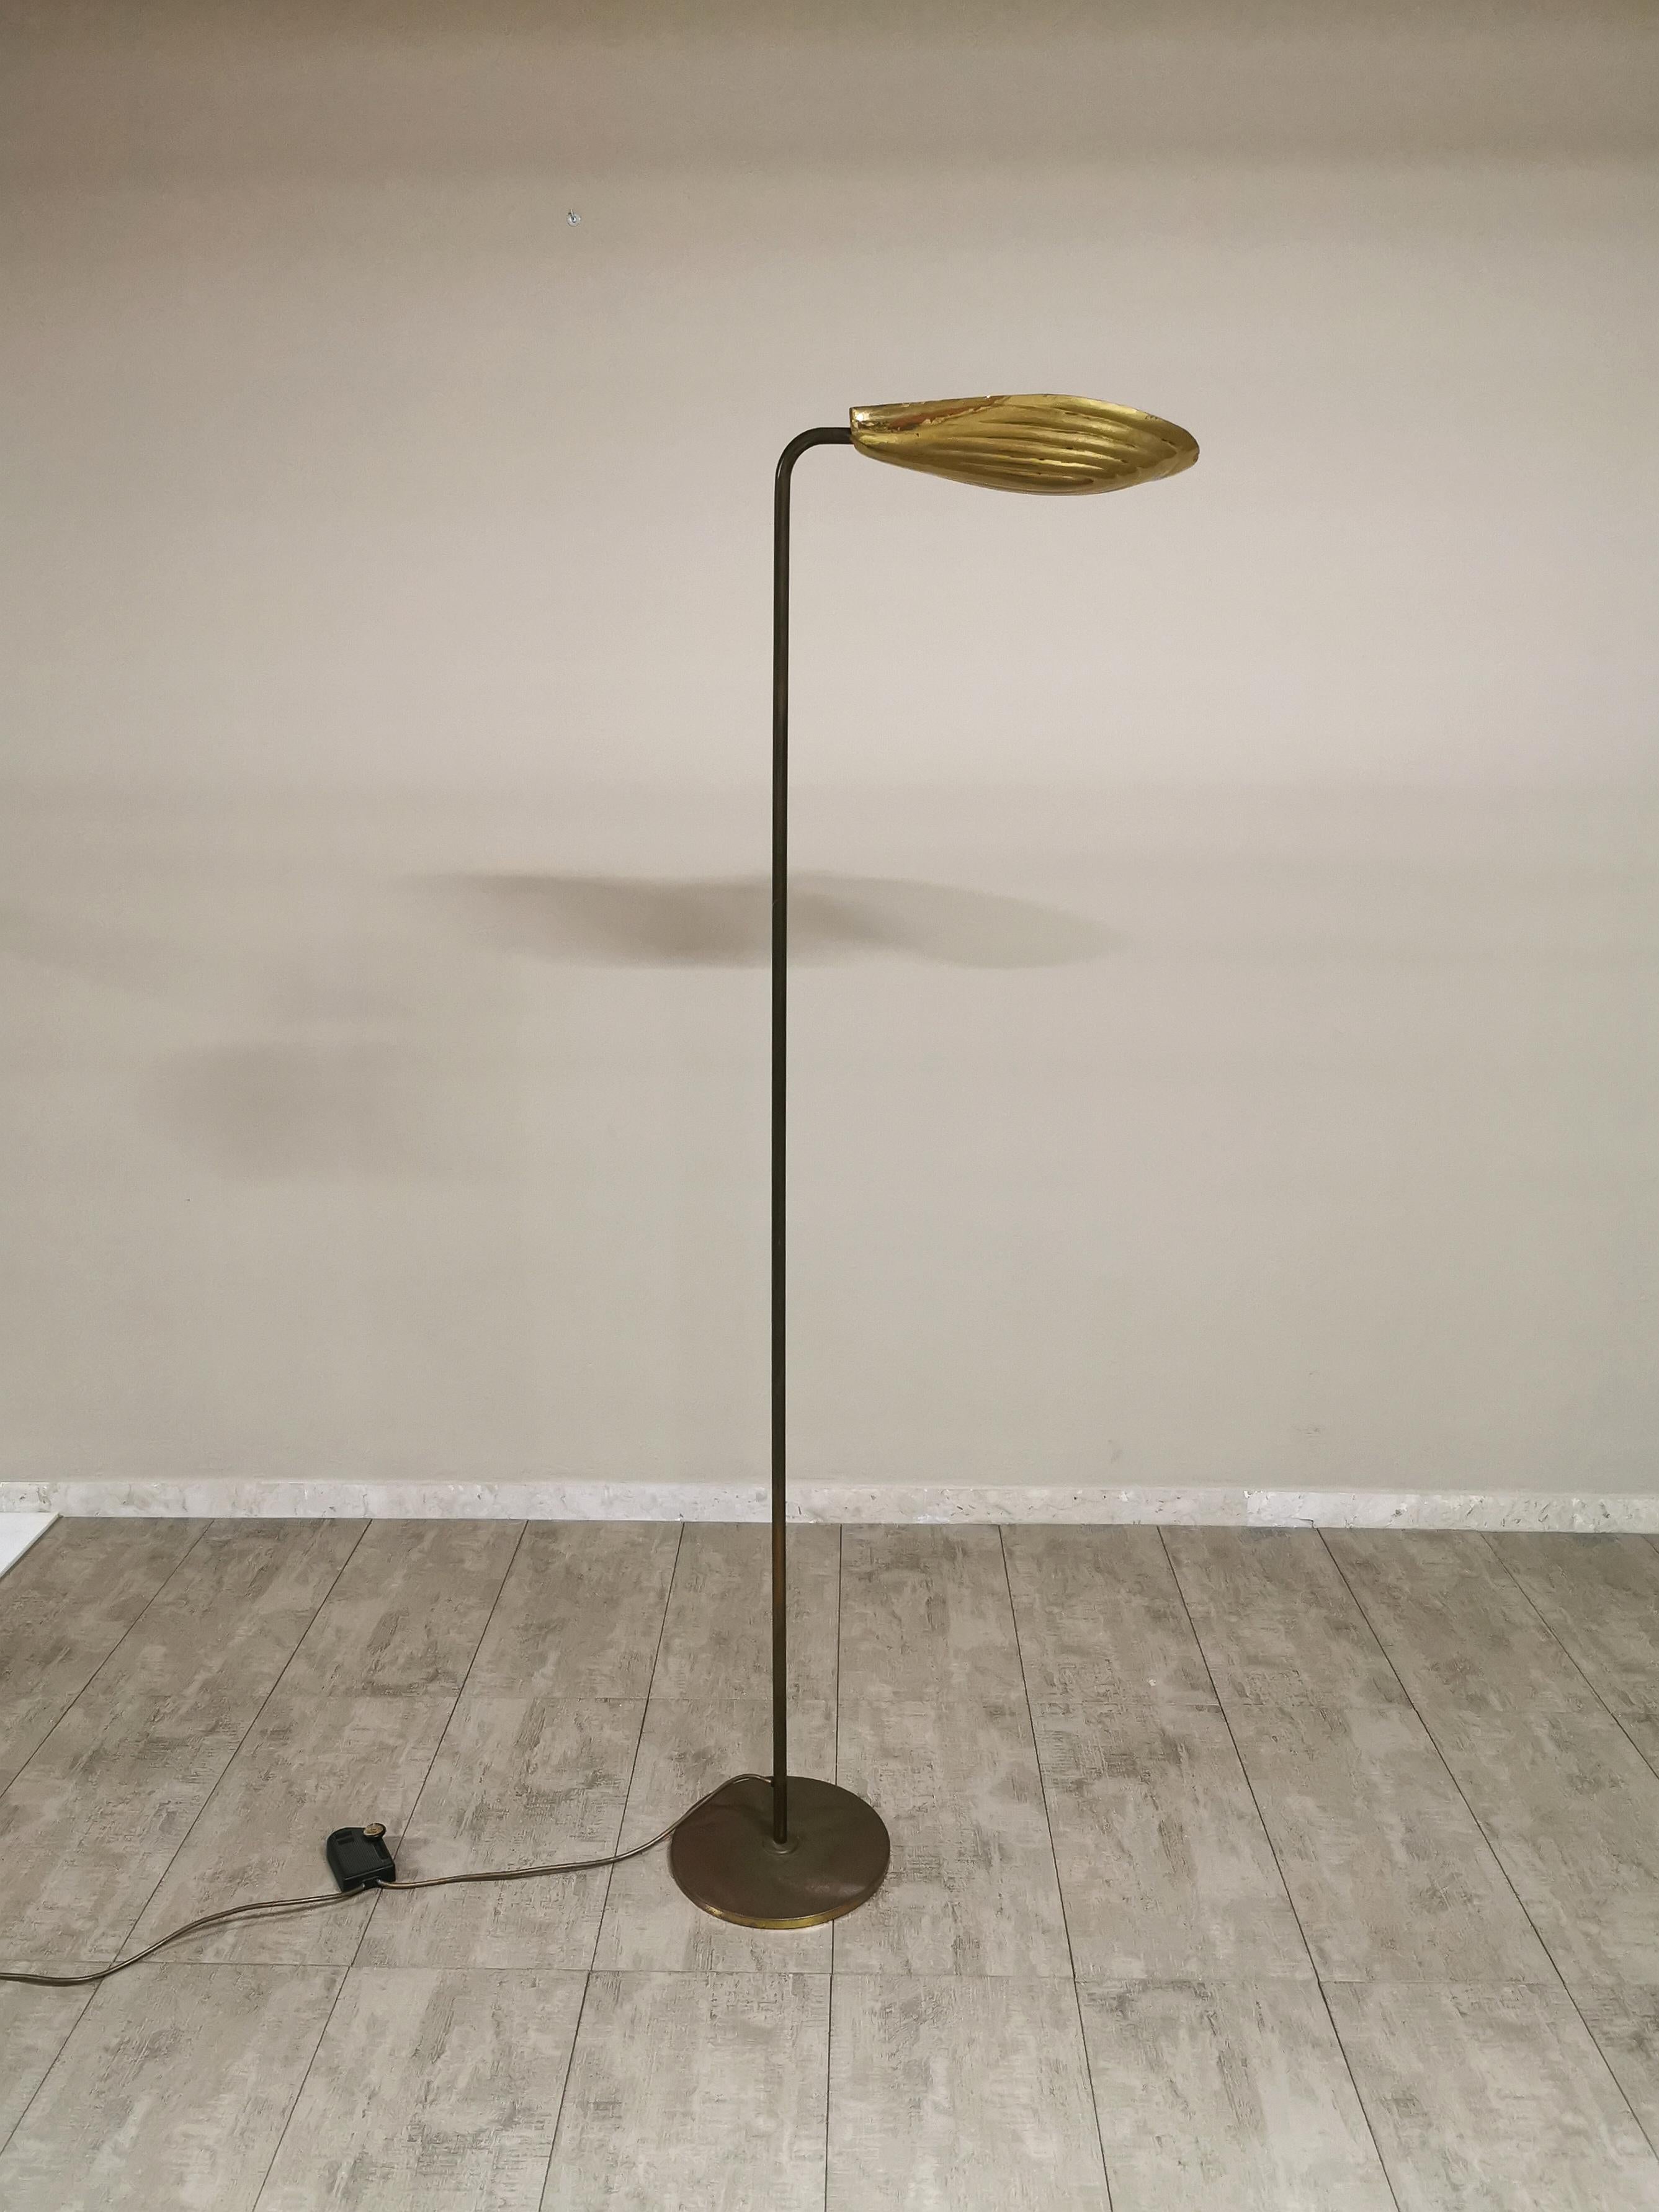 Late 20th Century Modern Floor Lamp in Brass Adjustable by Relco Milano, Italian Design, 1980s